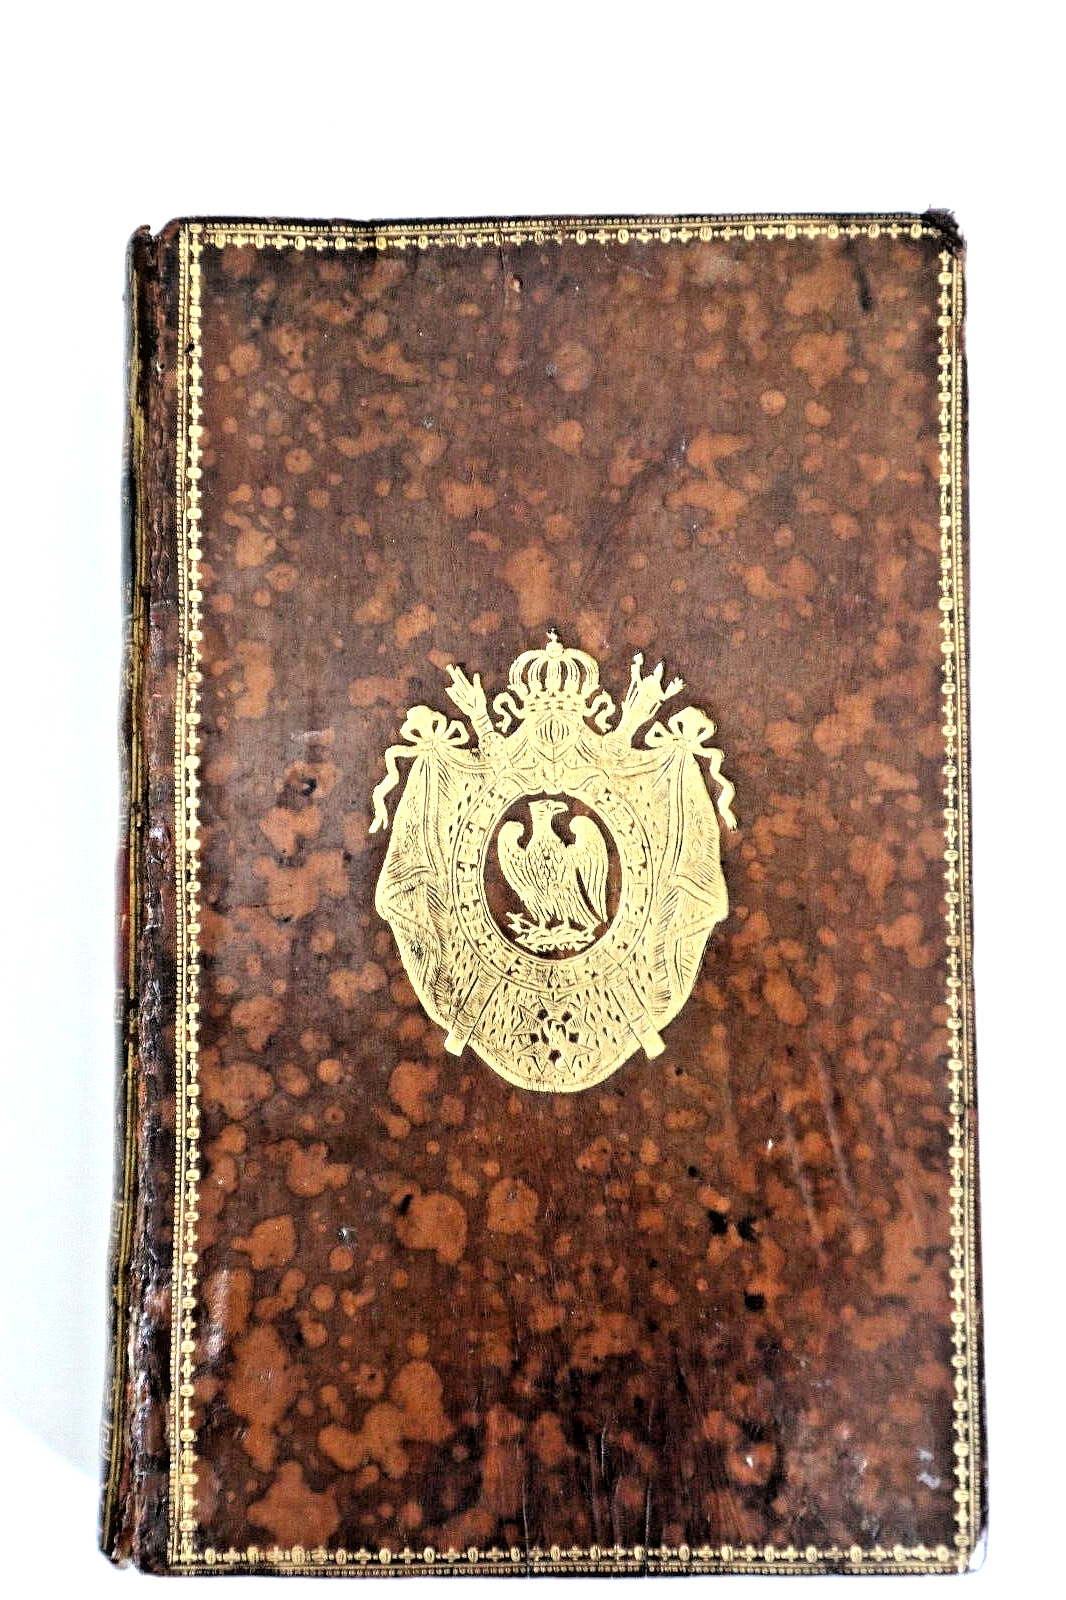 NAPOLEON BONAPARTE PERSONAL OWNED BOOK FROM HIS LIBRARY ROYAL CIPHER NOT SIGNED